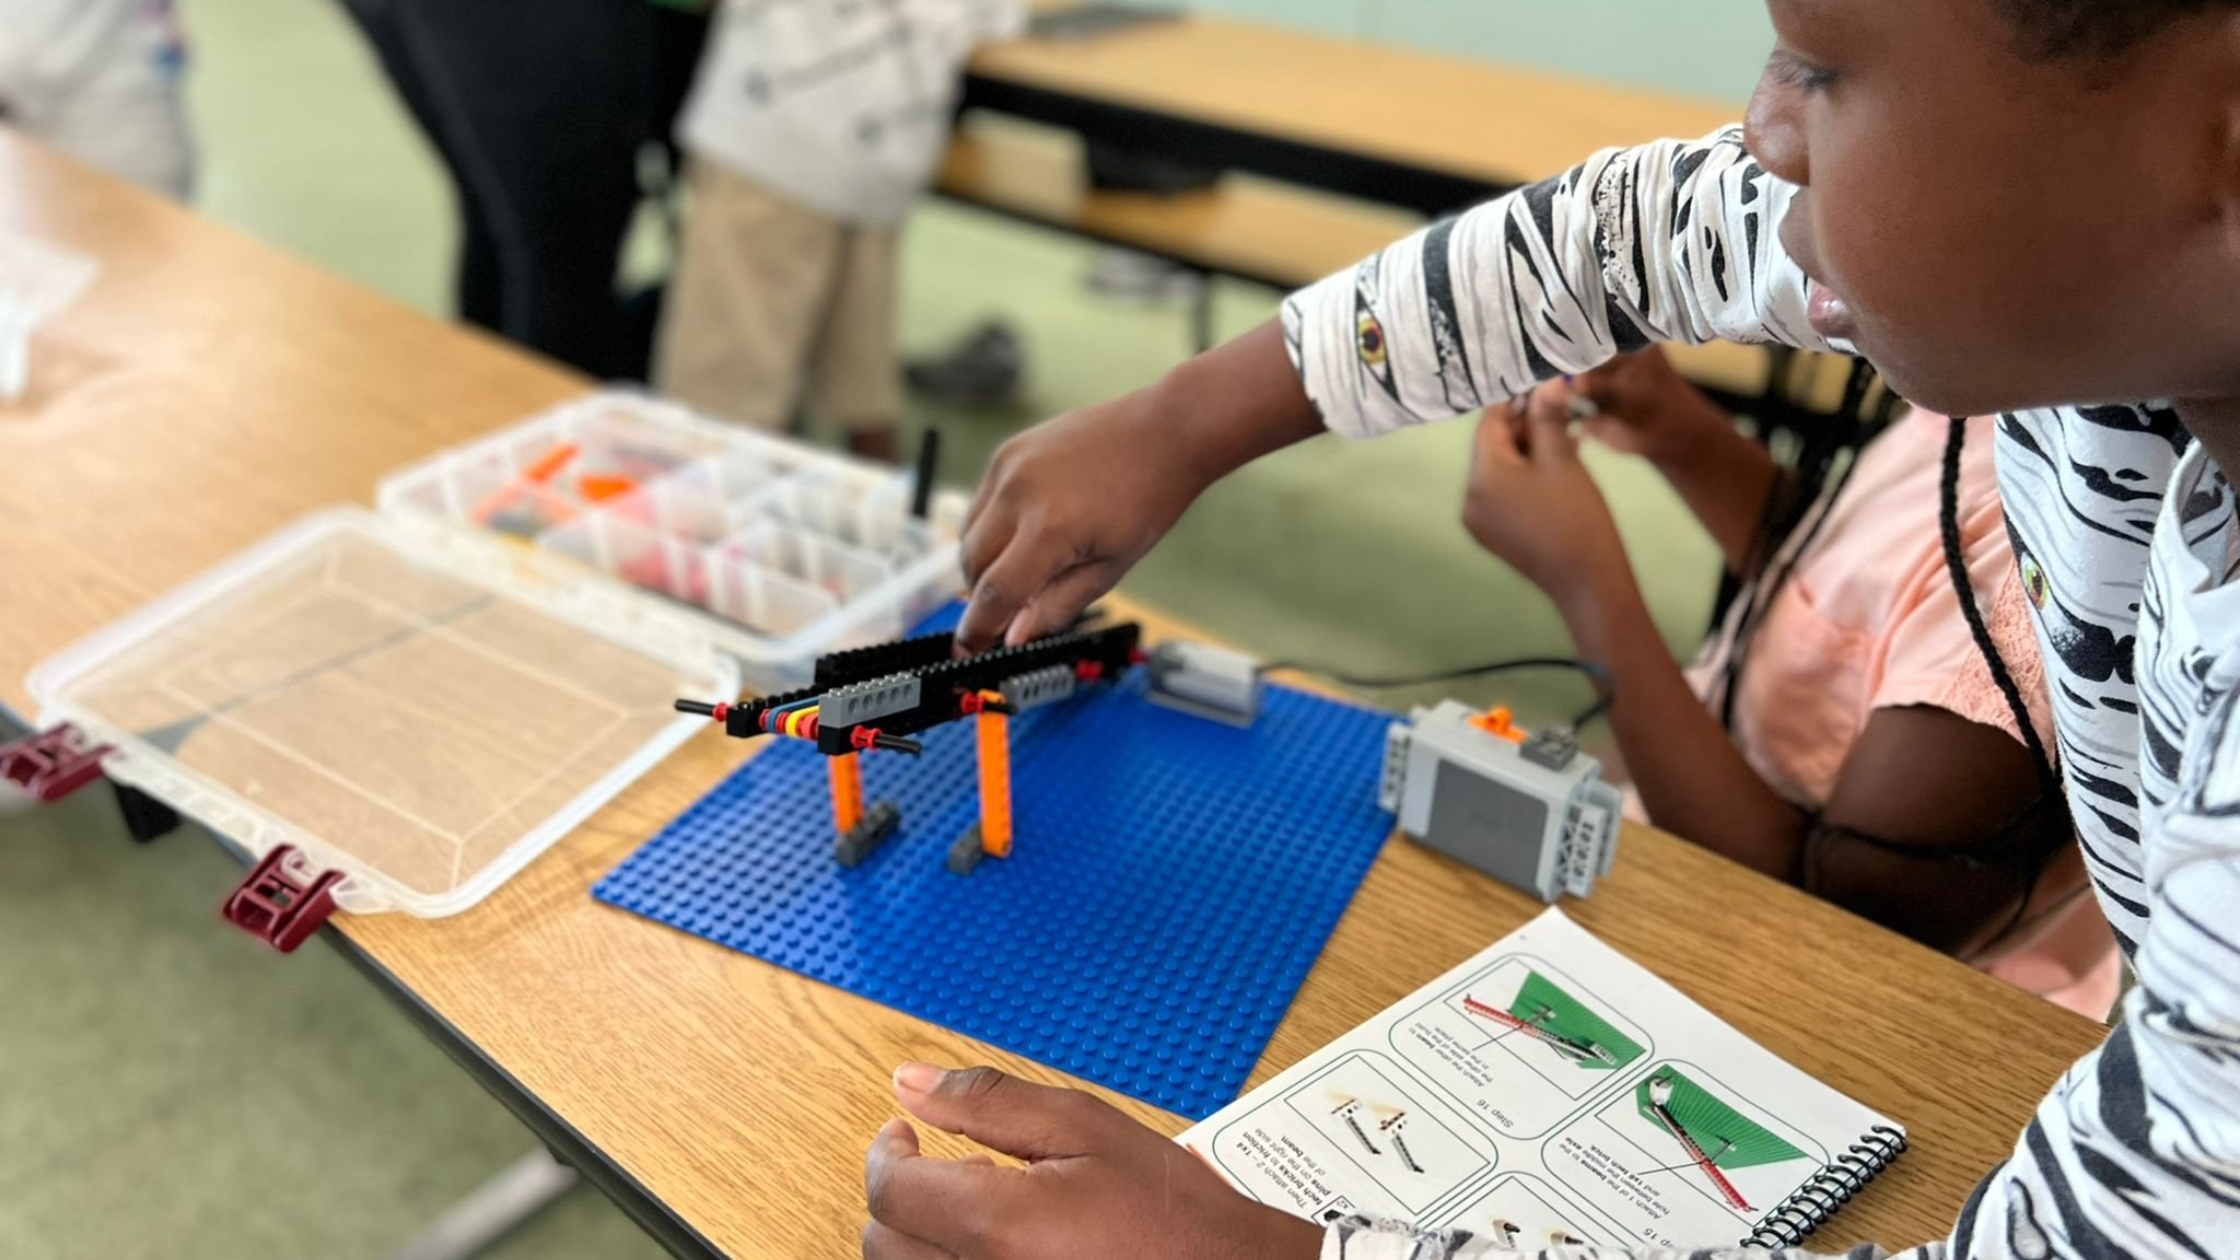 5 Ways to Foster STEAM Learning During Summer Break